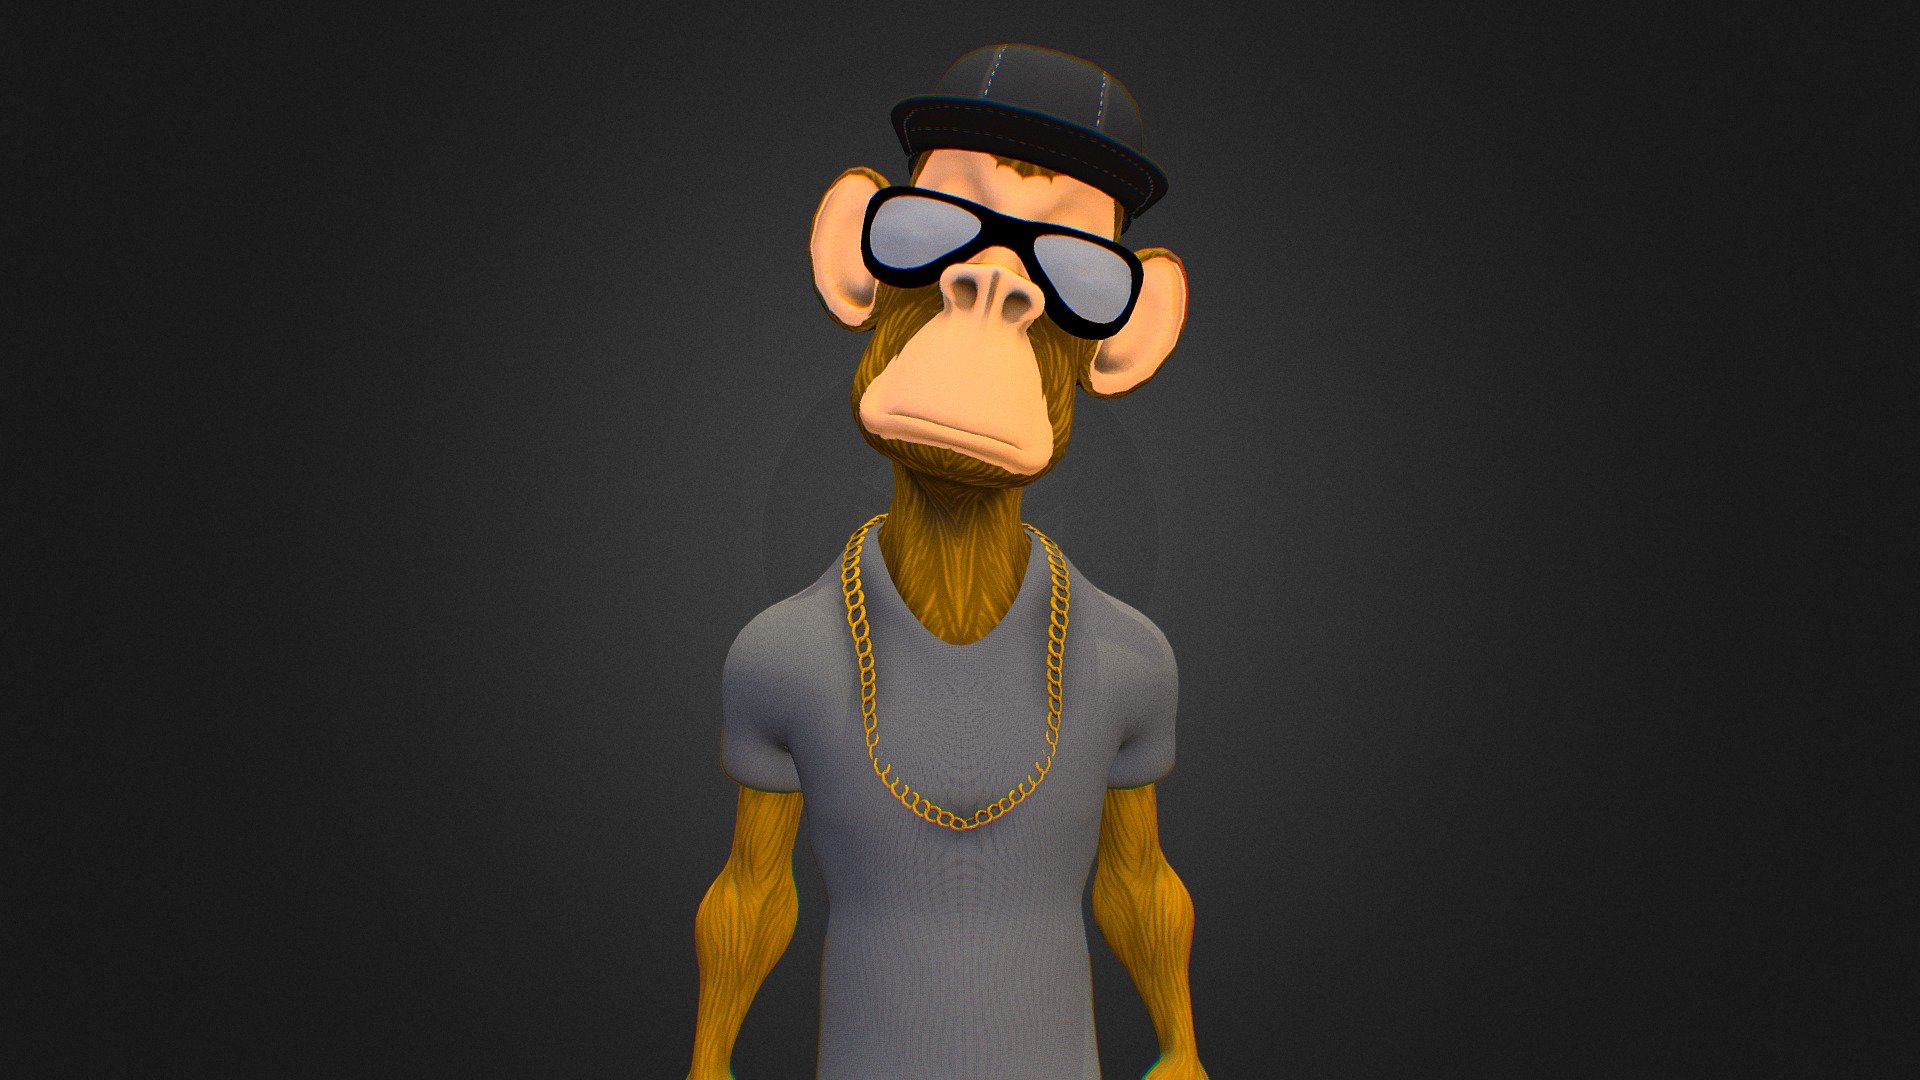 NFT Toon Monkey rigged and animated - NFT Toon Monkey rigged and animated - 3D model by Mahmoud.Moh 3d model